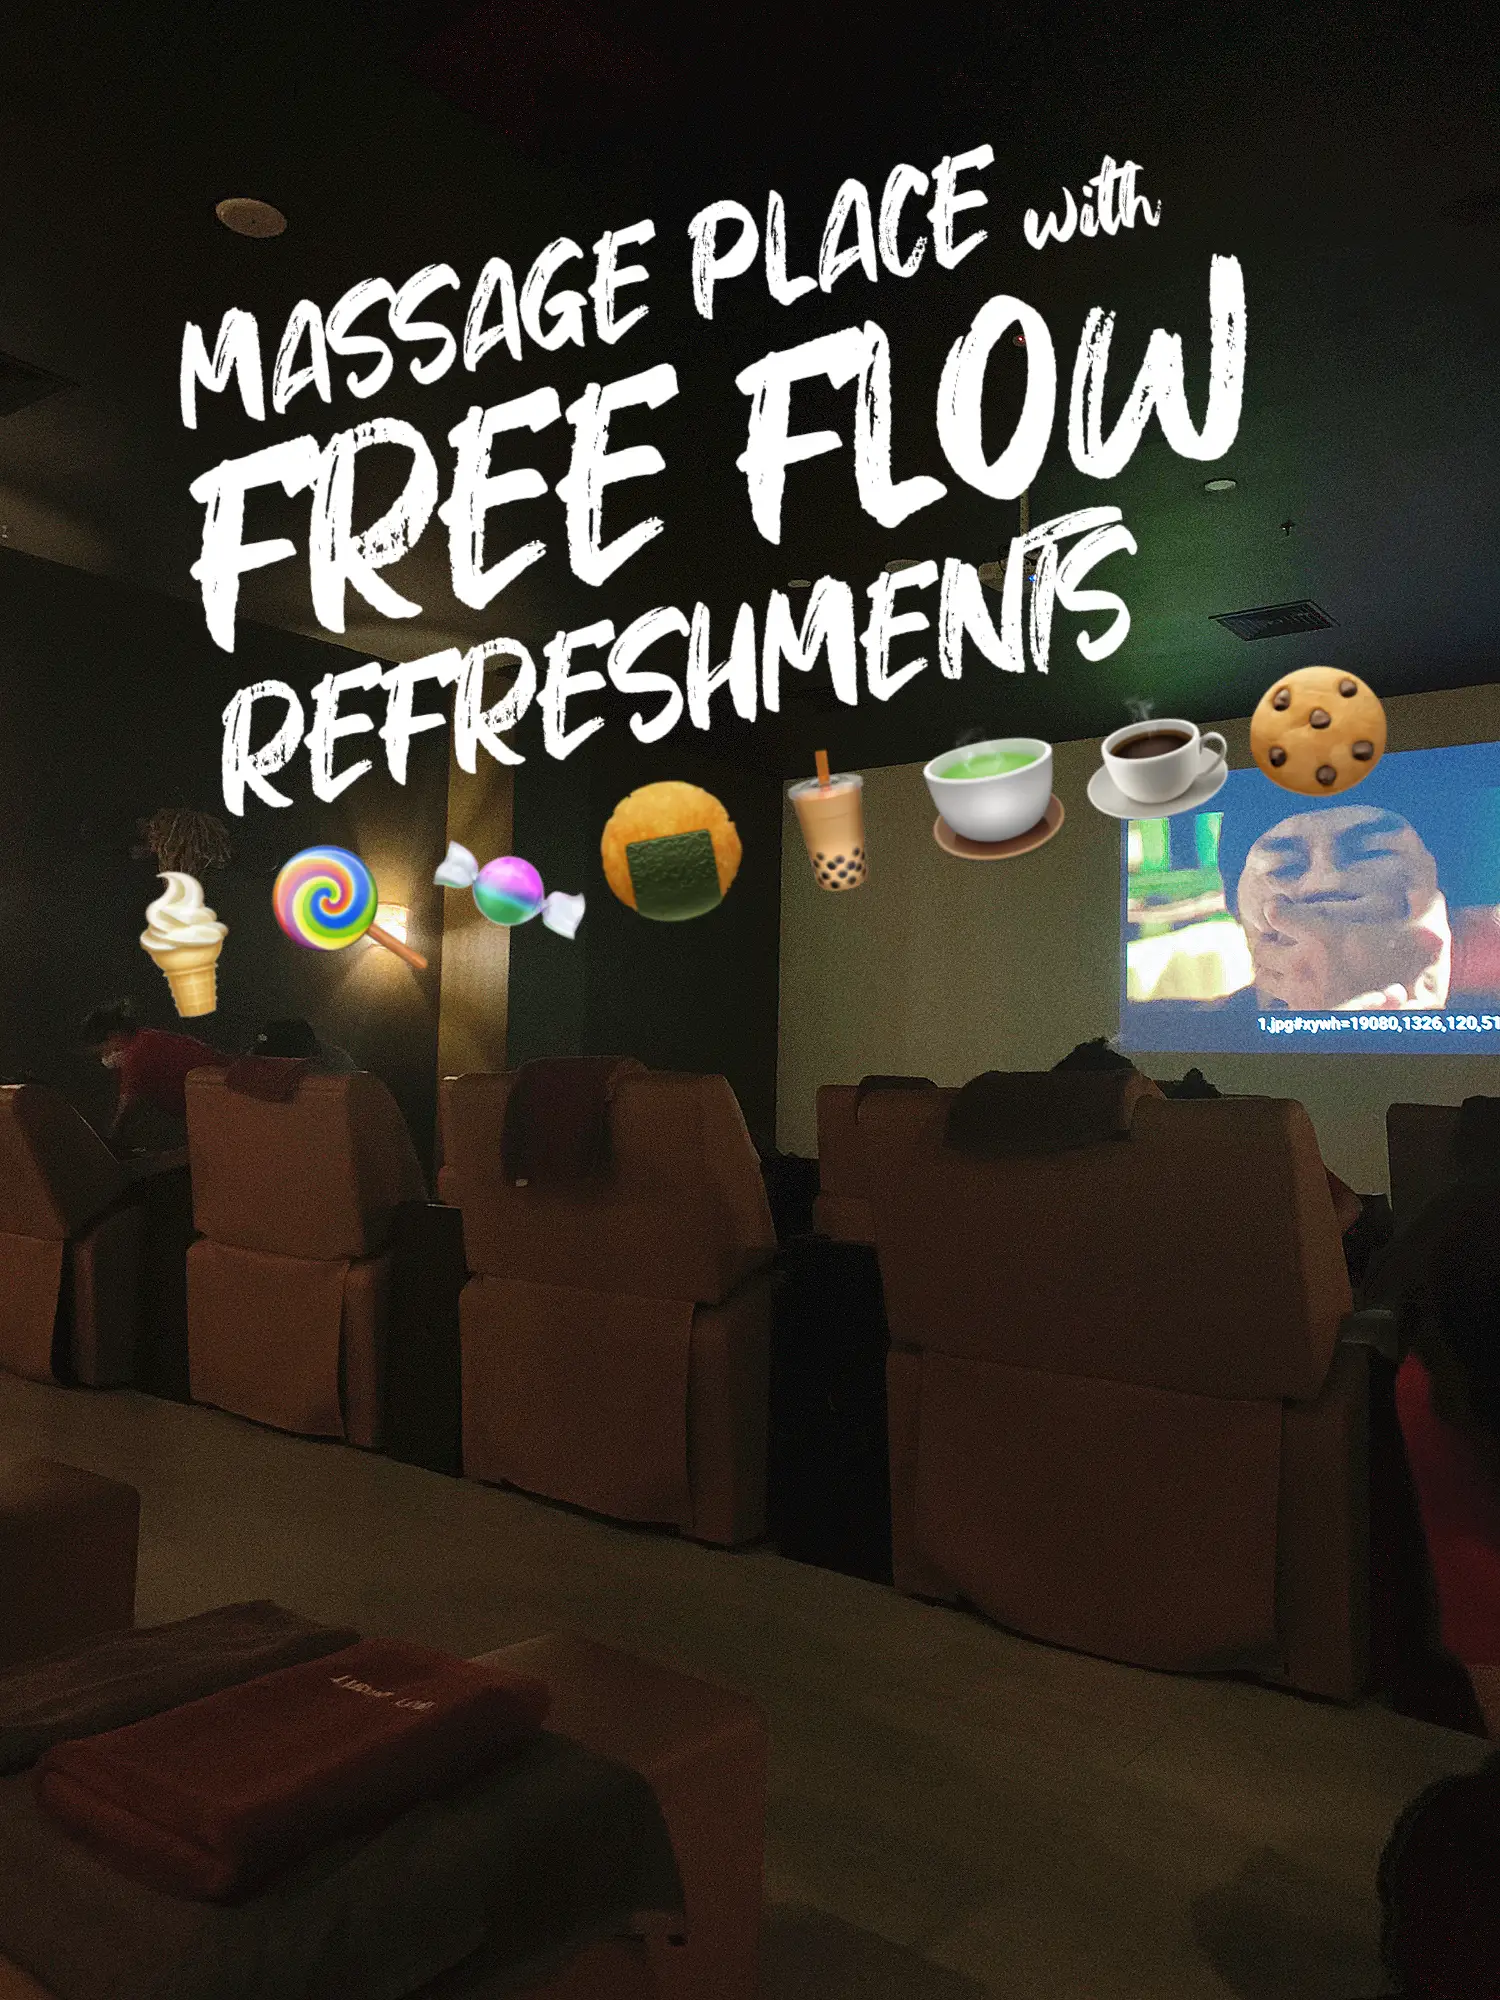 LEVEL UP YOUR NEXT MASSAGE EXPERIENCE AT KSL 💆‍♂️ 's images